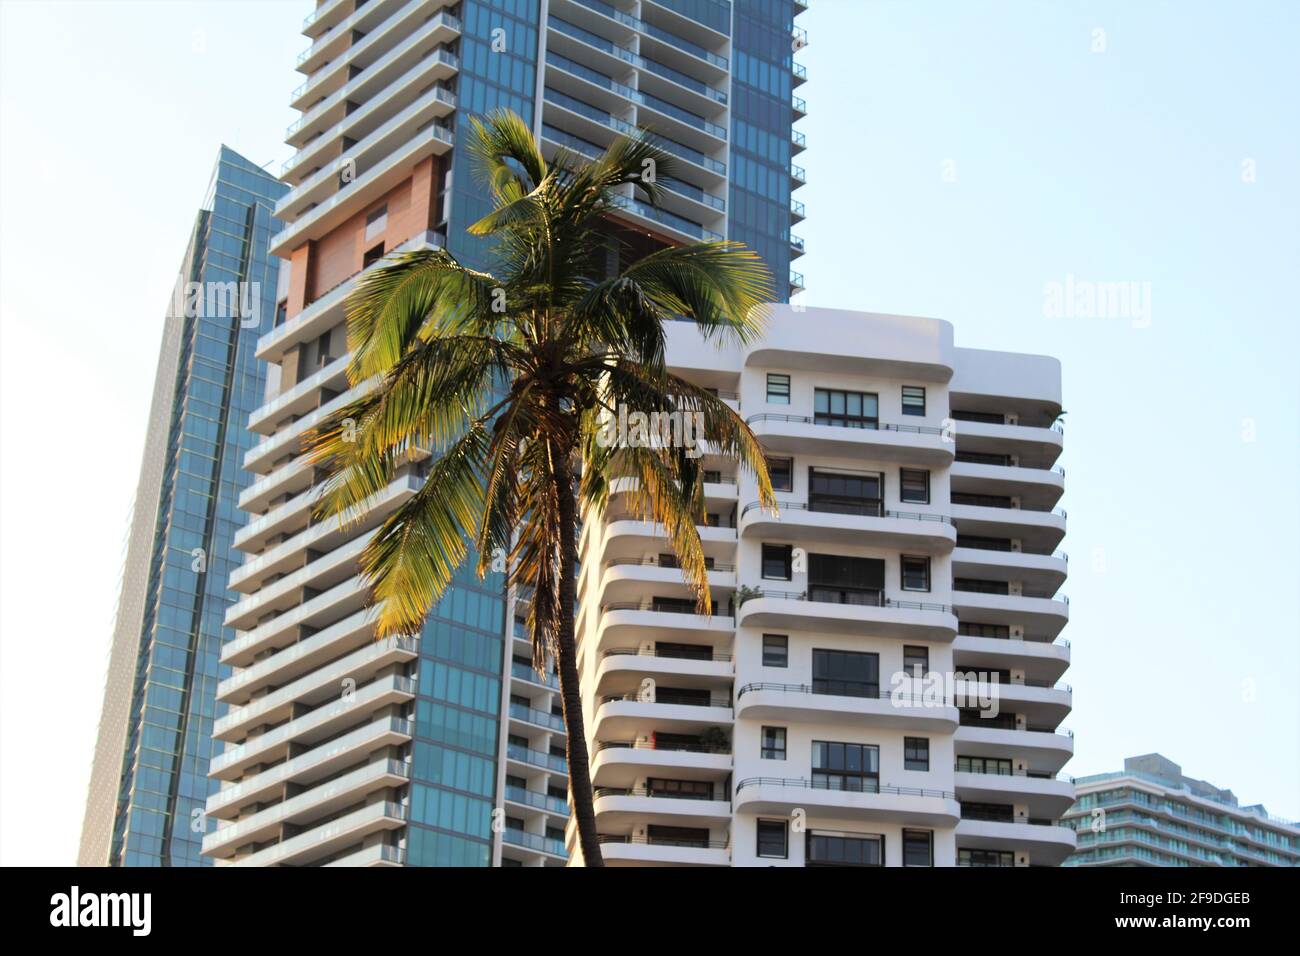 Tall condominiums in Brickell, Miami Florida. Large palm tree in the foreground.  Brickell East Condo Association Inc and Echo Brickell Residences Stock Photo